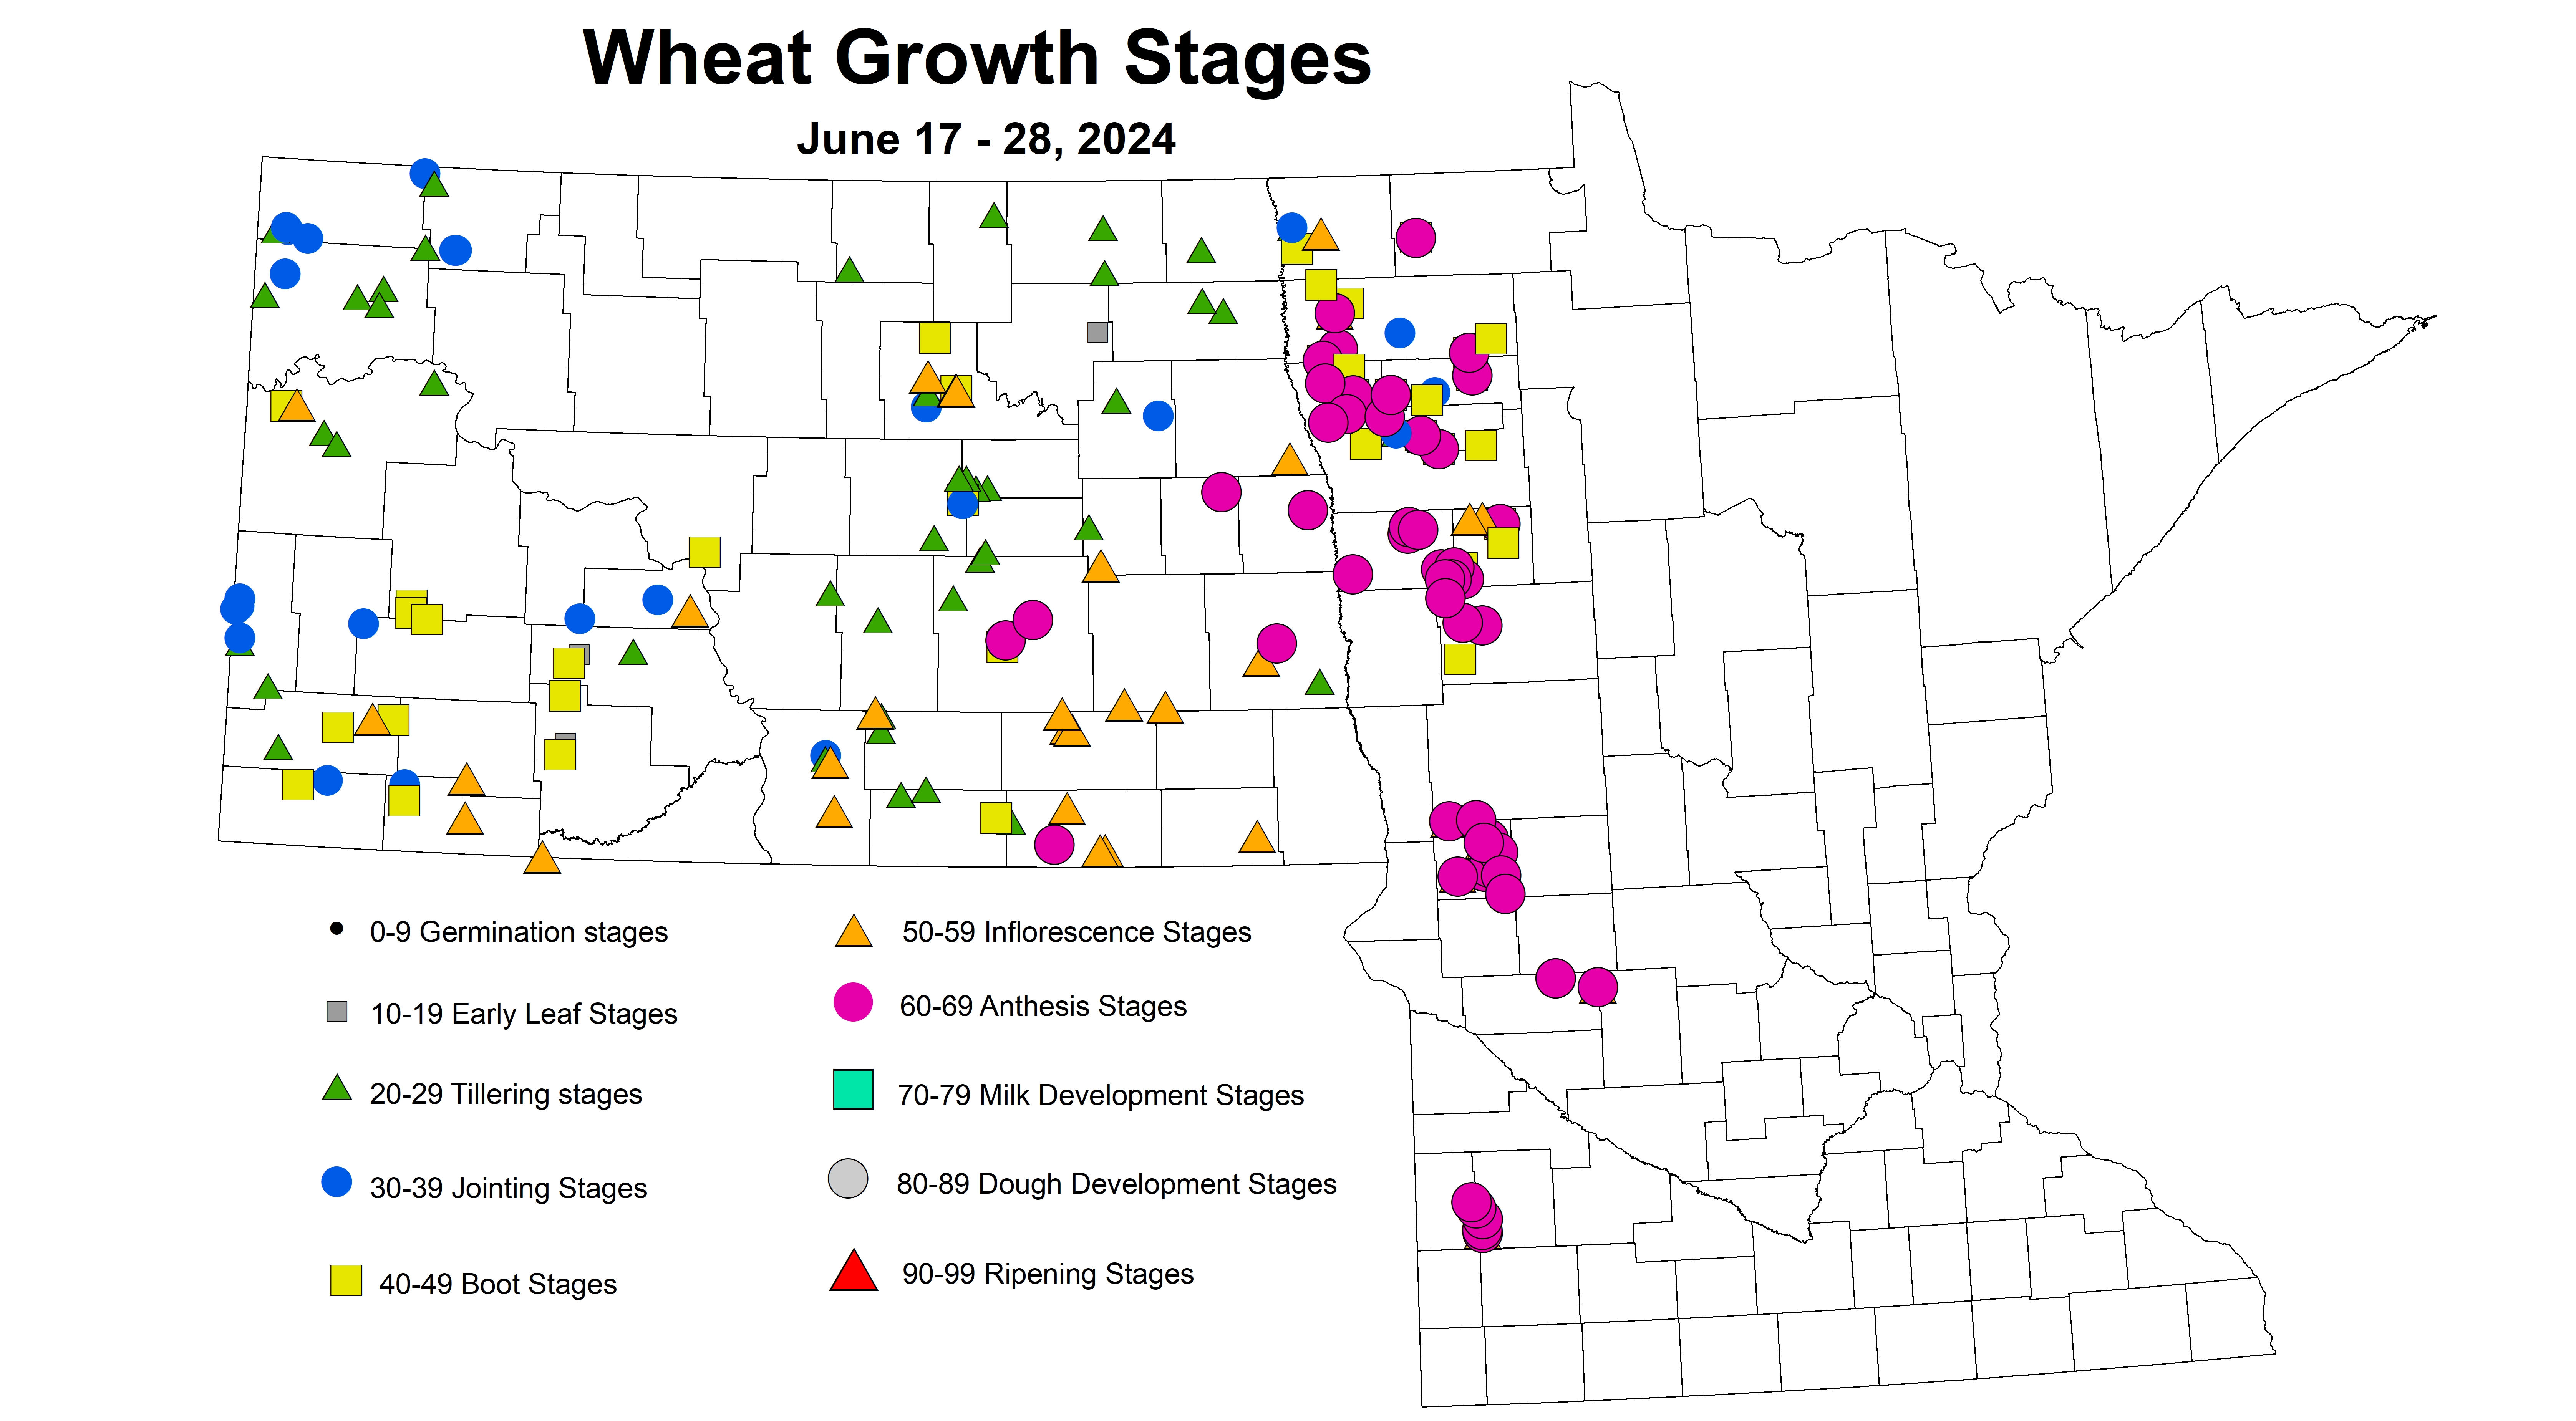 wheat growth stages 2024 6.17-6.28